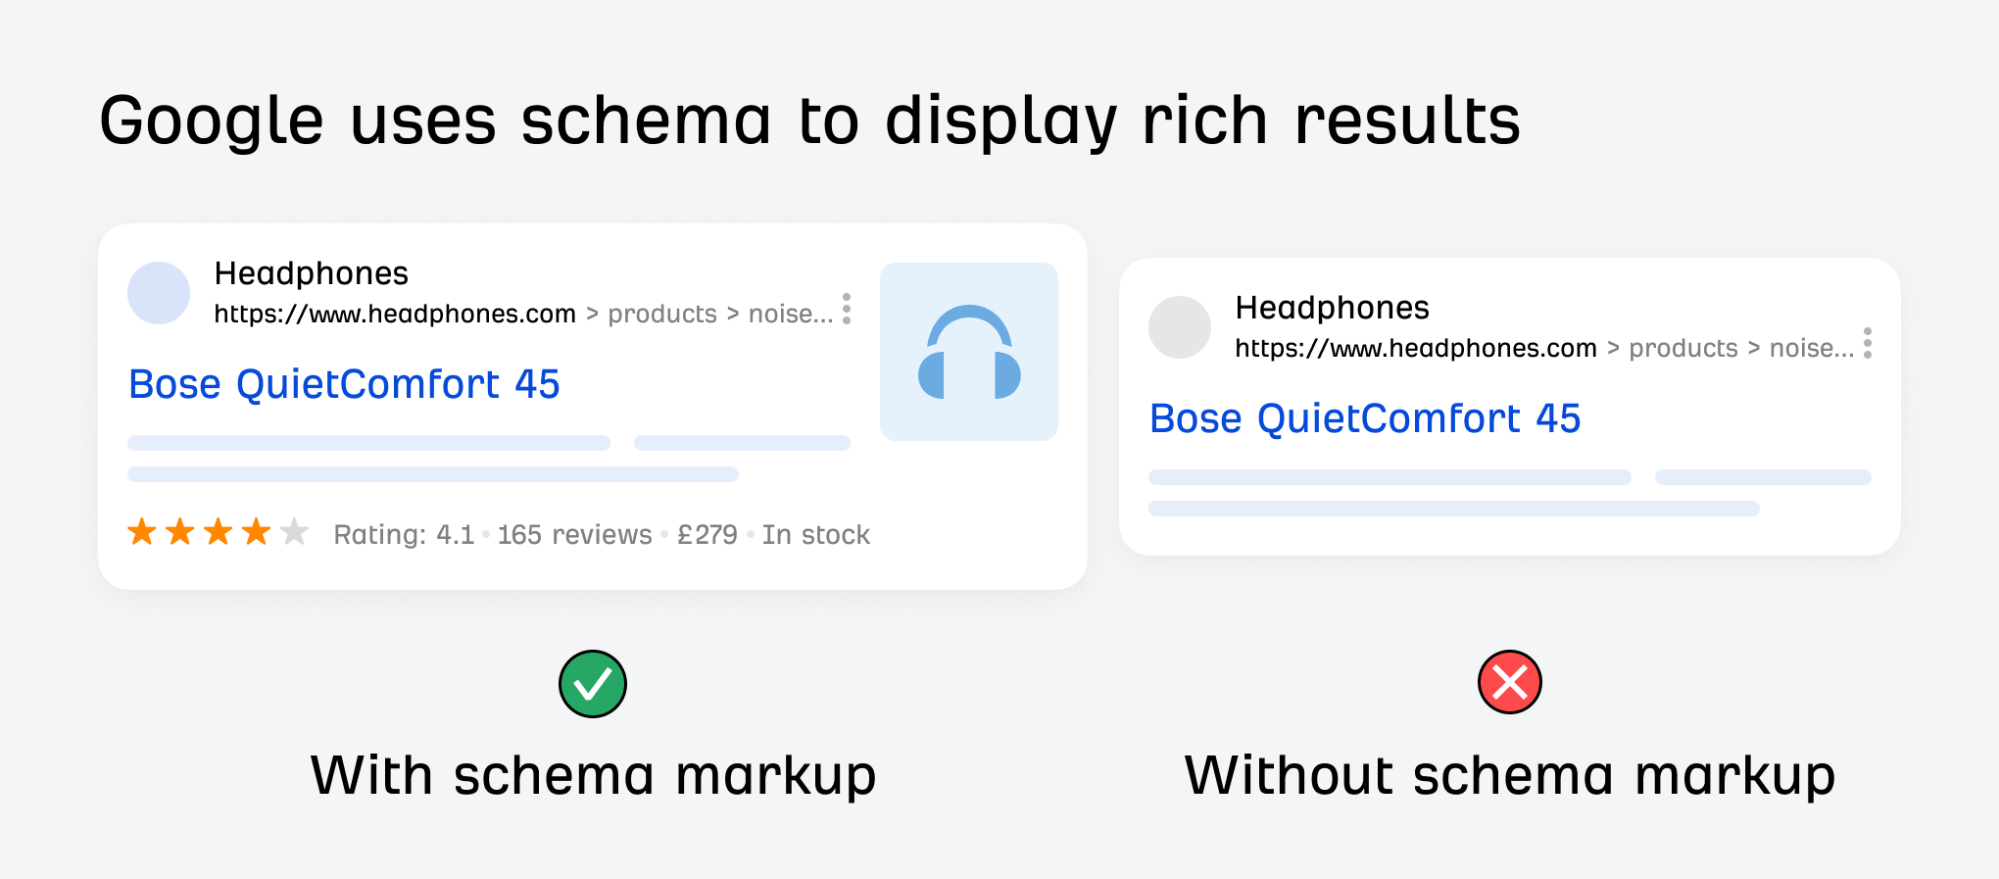 Example of how Google uses schema to display rich results